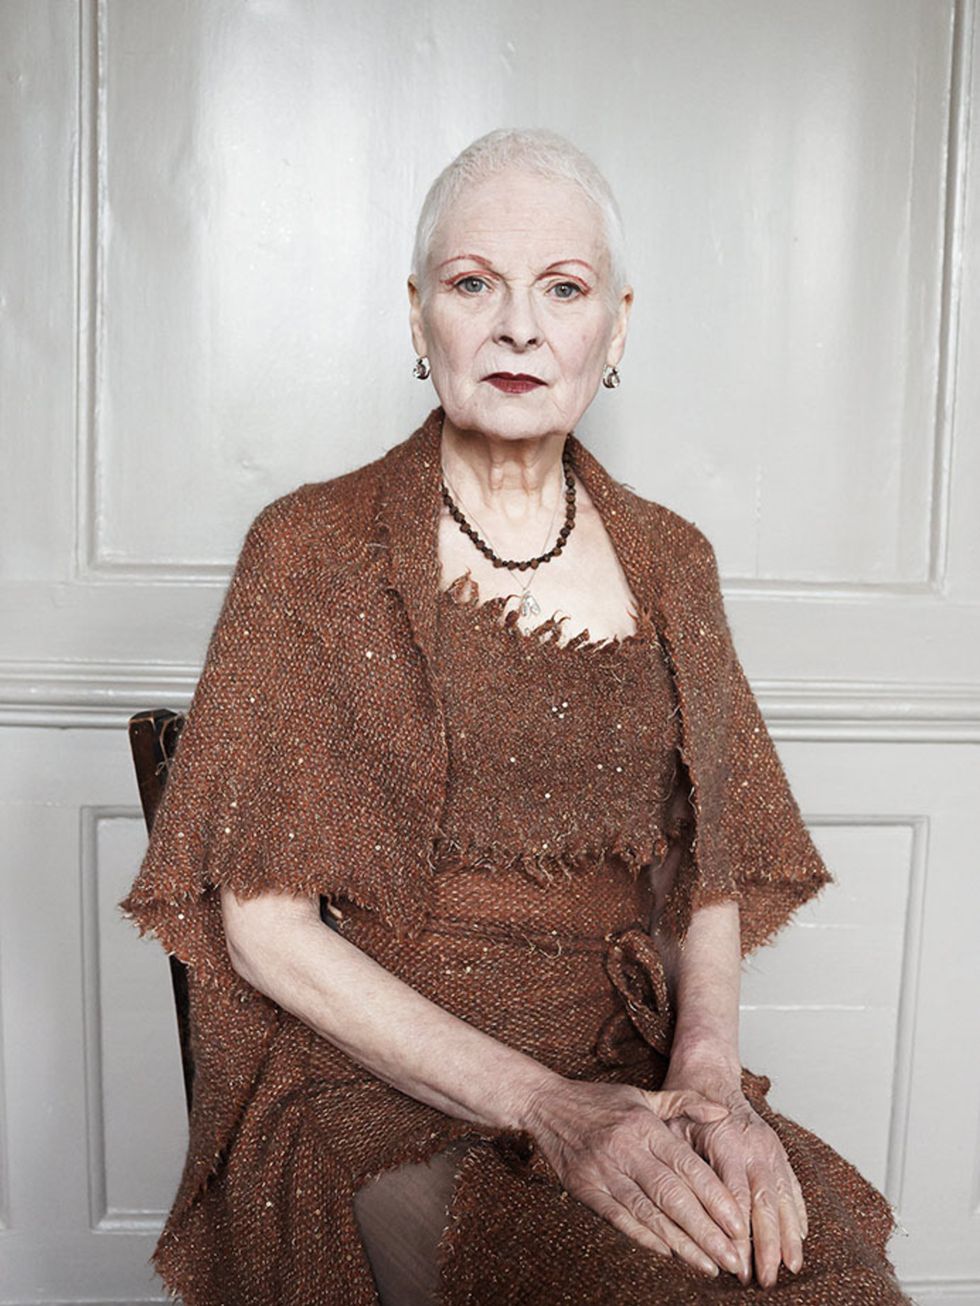 <p><strong>EXHIBITION: Vivienne Westwood: Cut From The Past</strong></p>

<p>You might not think that punk rocks designer-in-chief would have much in common with 18th century Rococo artists. Well youd be wrong, and this is the exhibition that proves it.